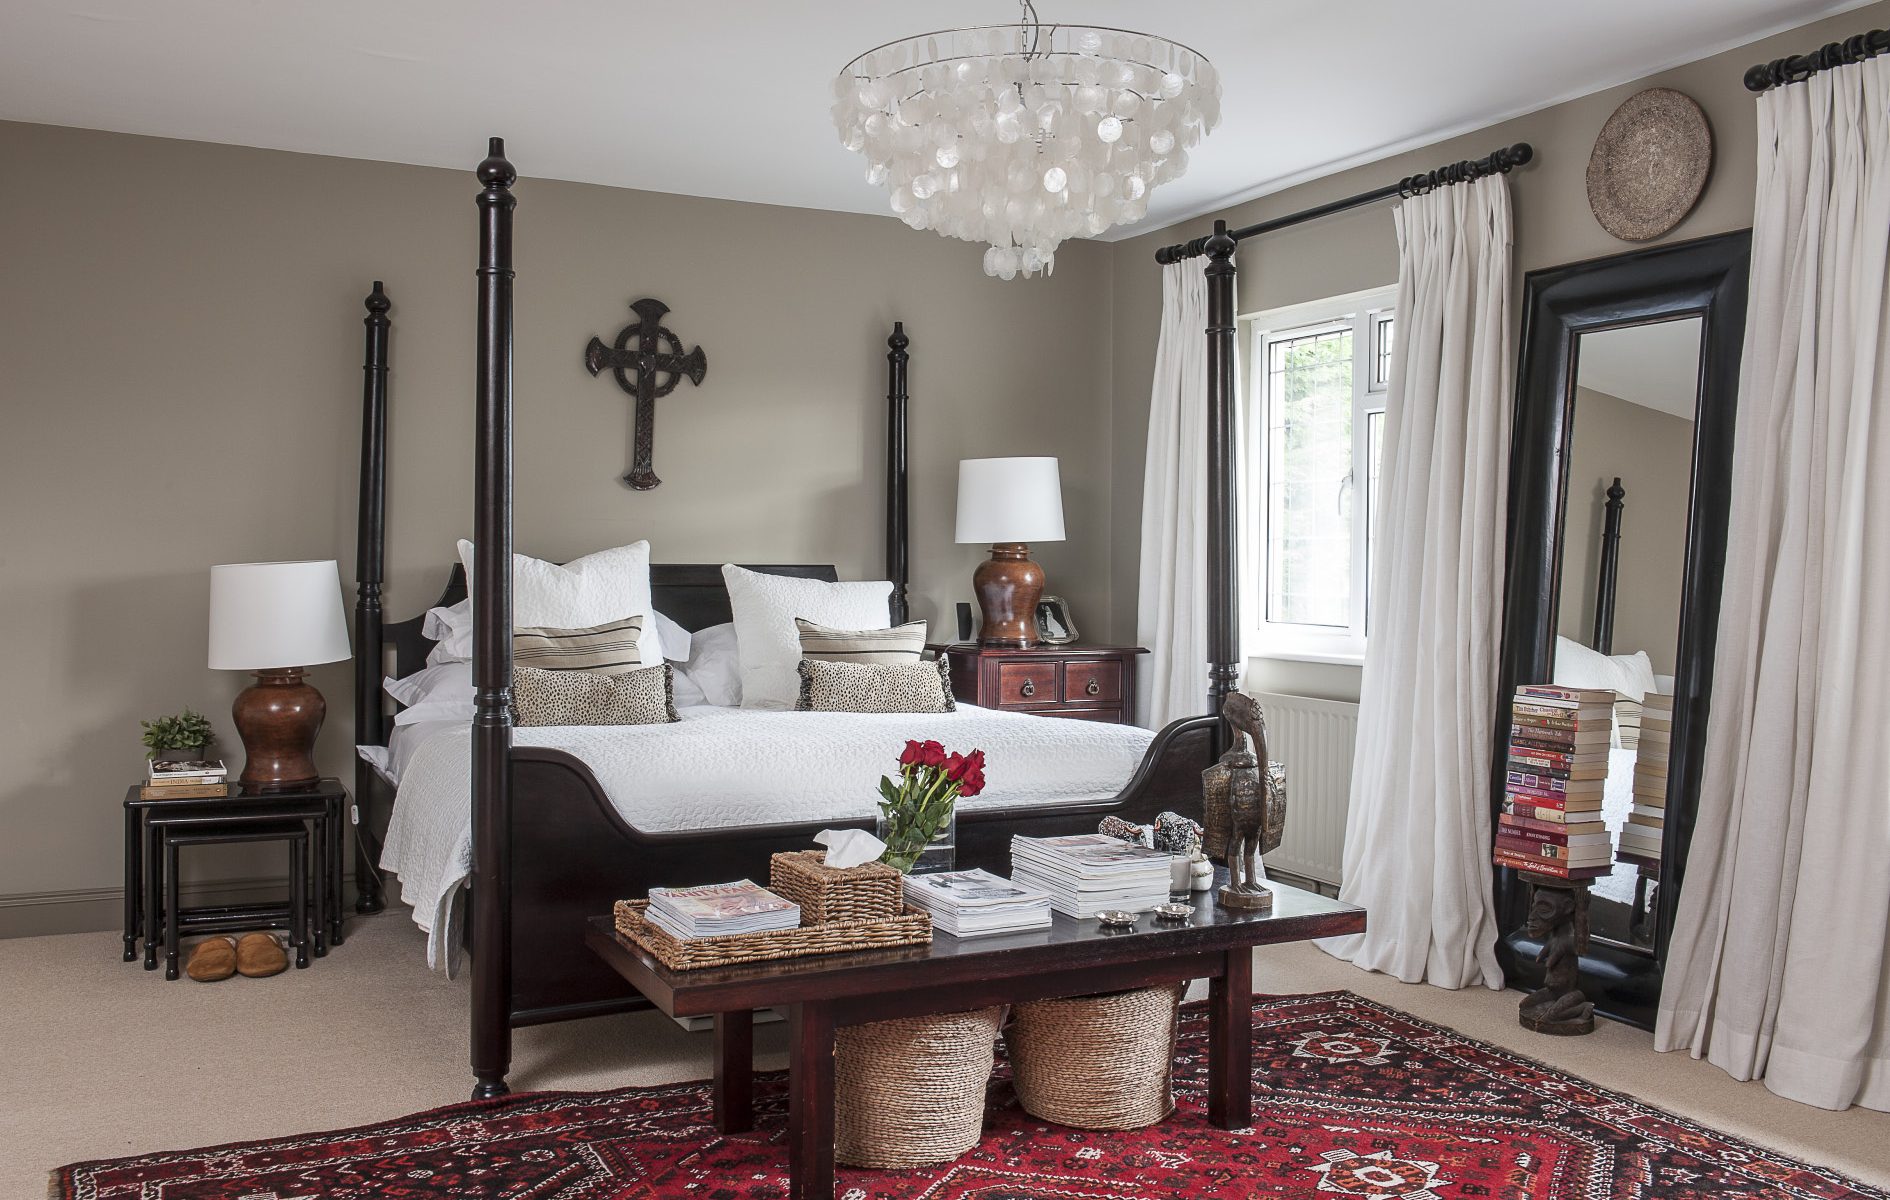 The simple, calm tones of Farrow & Ball Light Grey complement the Shiraz rug and four poster in the master bedroom